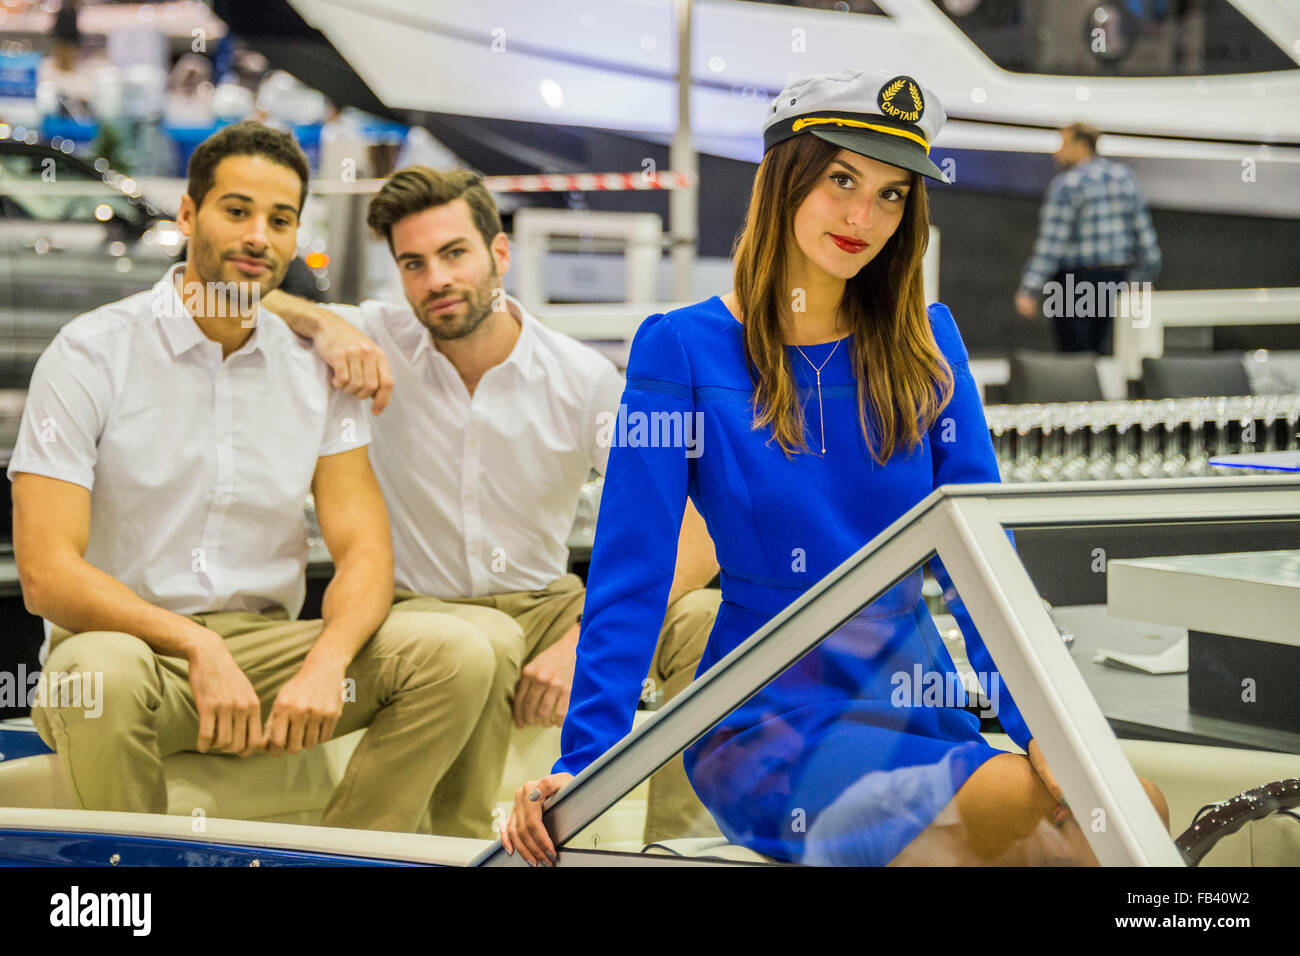 London, UK. 8th January, 2016. Lucy Watson, Star of Made in Chelsea, opens the show and poses on a small luxury power boat. London Boat Show opens at the Ecel Centre in London. Credit:  Guy Bell/Alamy Live News Stock Photo